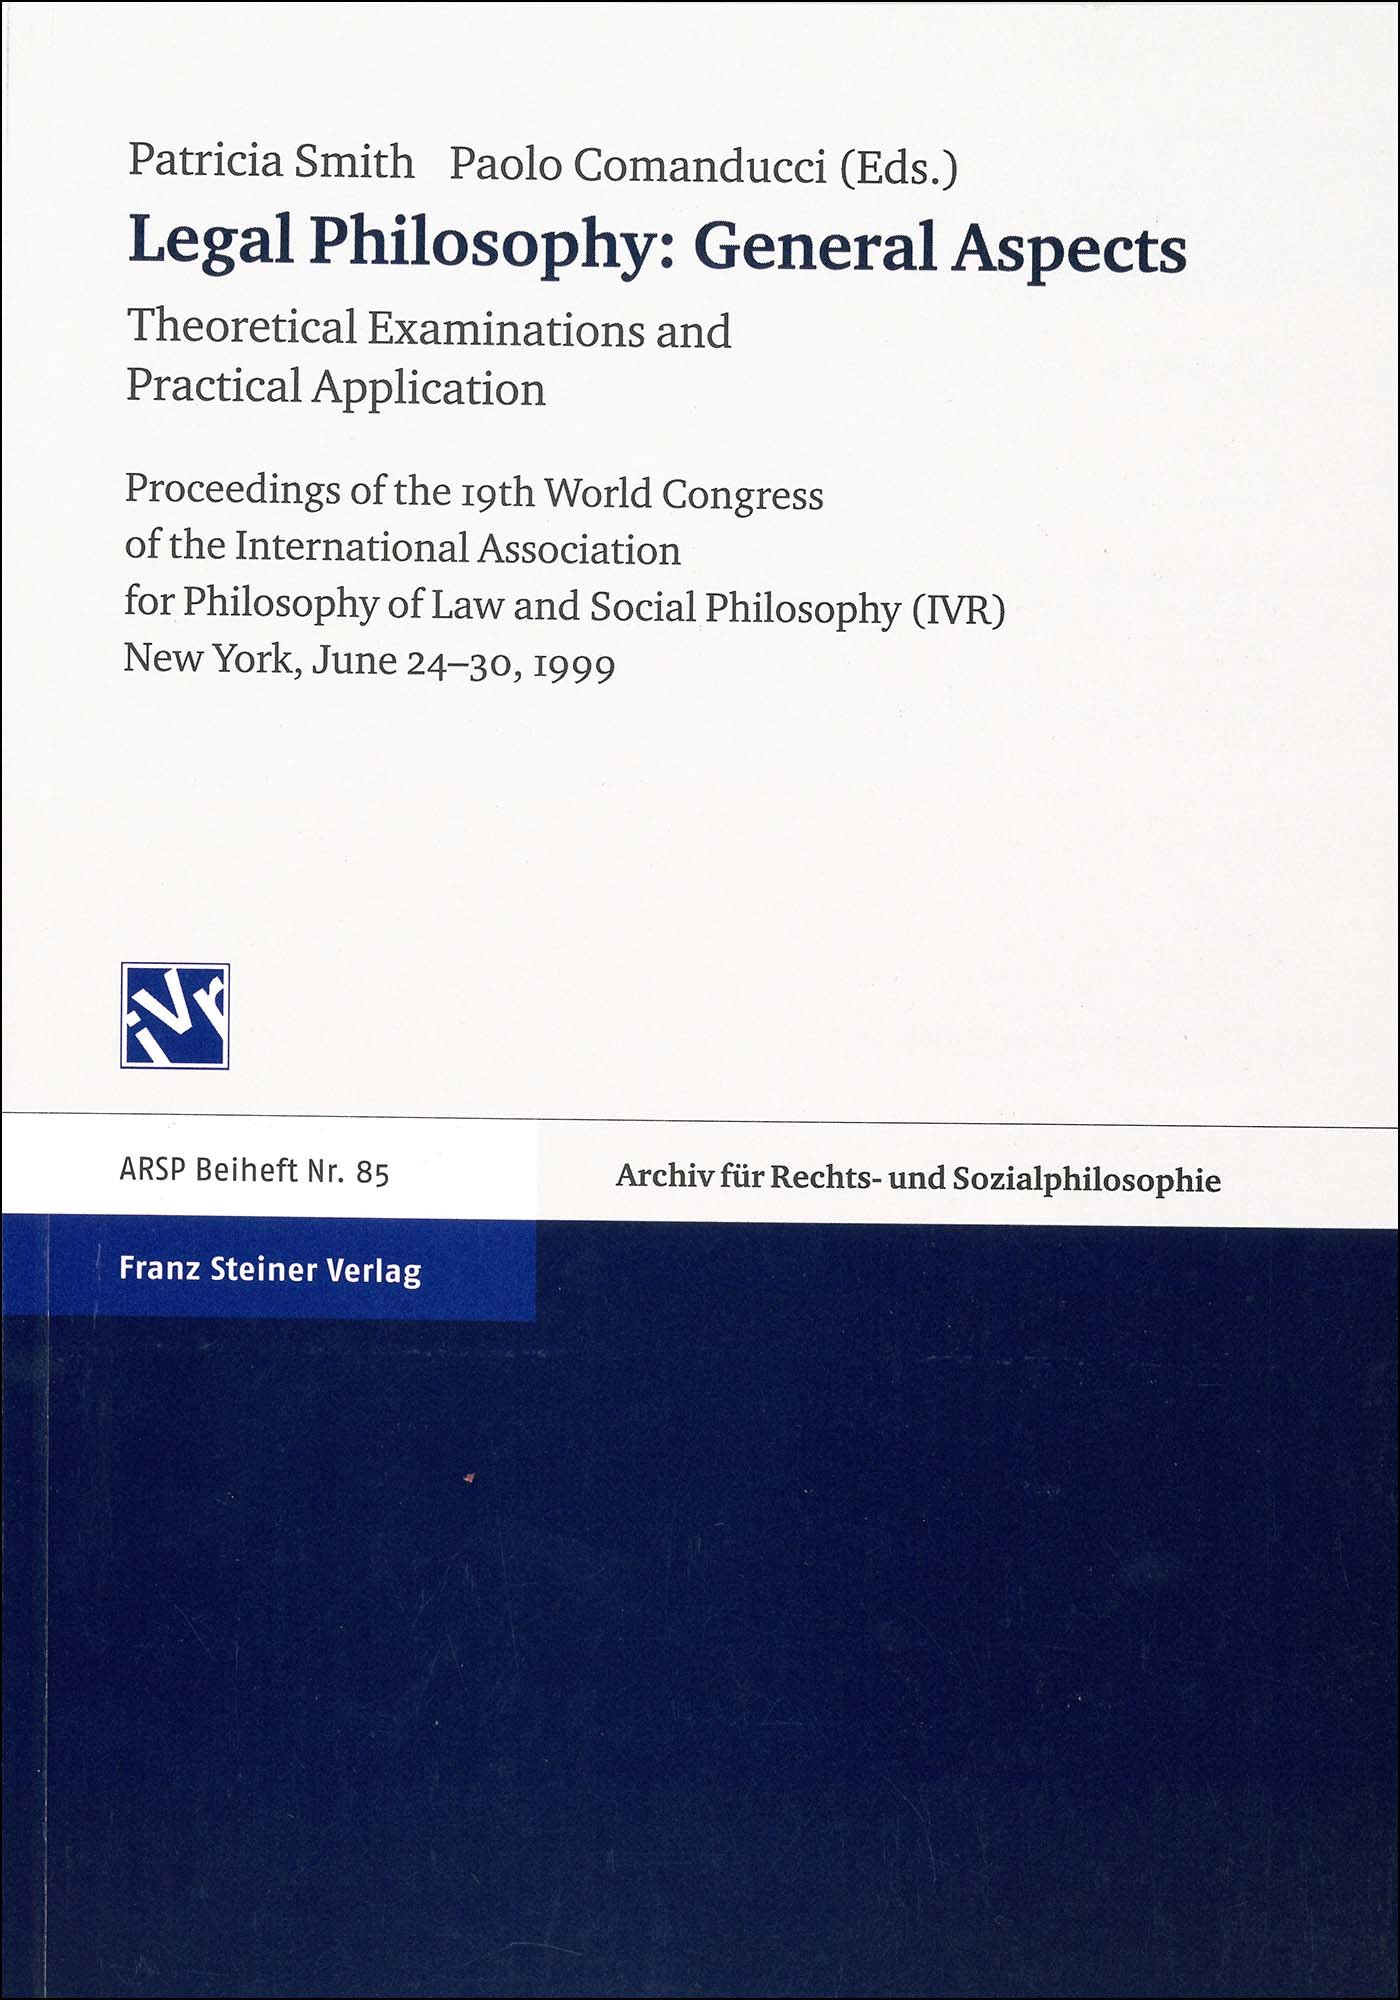 Legal Philosophy – General Aspects Vol. 2: Theoretical Examinations and Practical Application